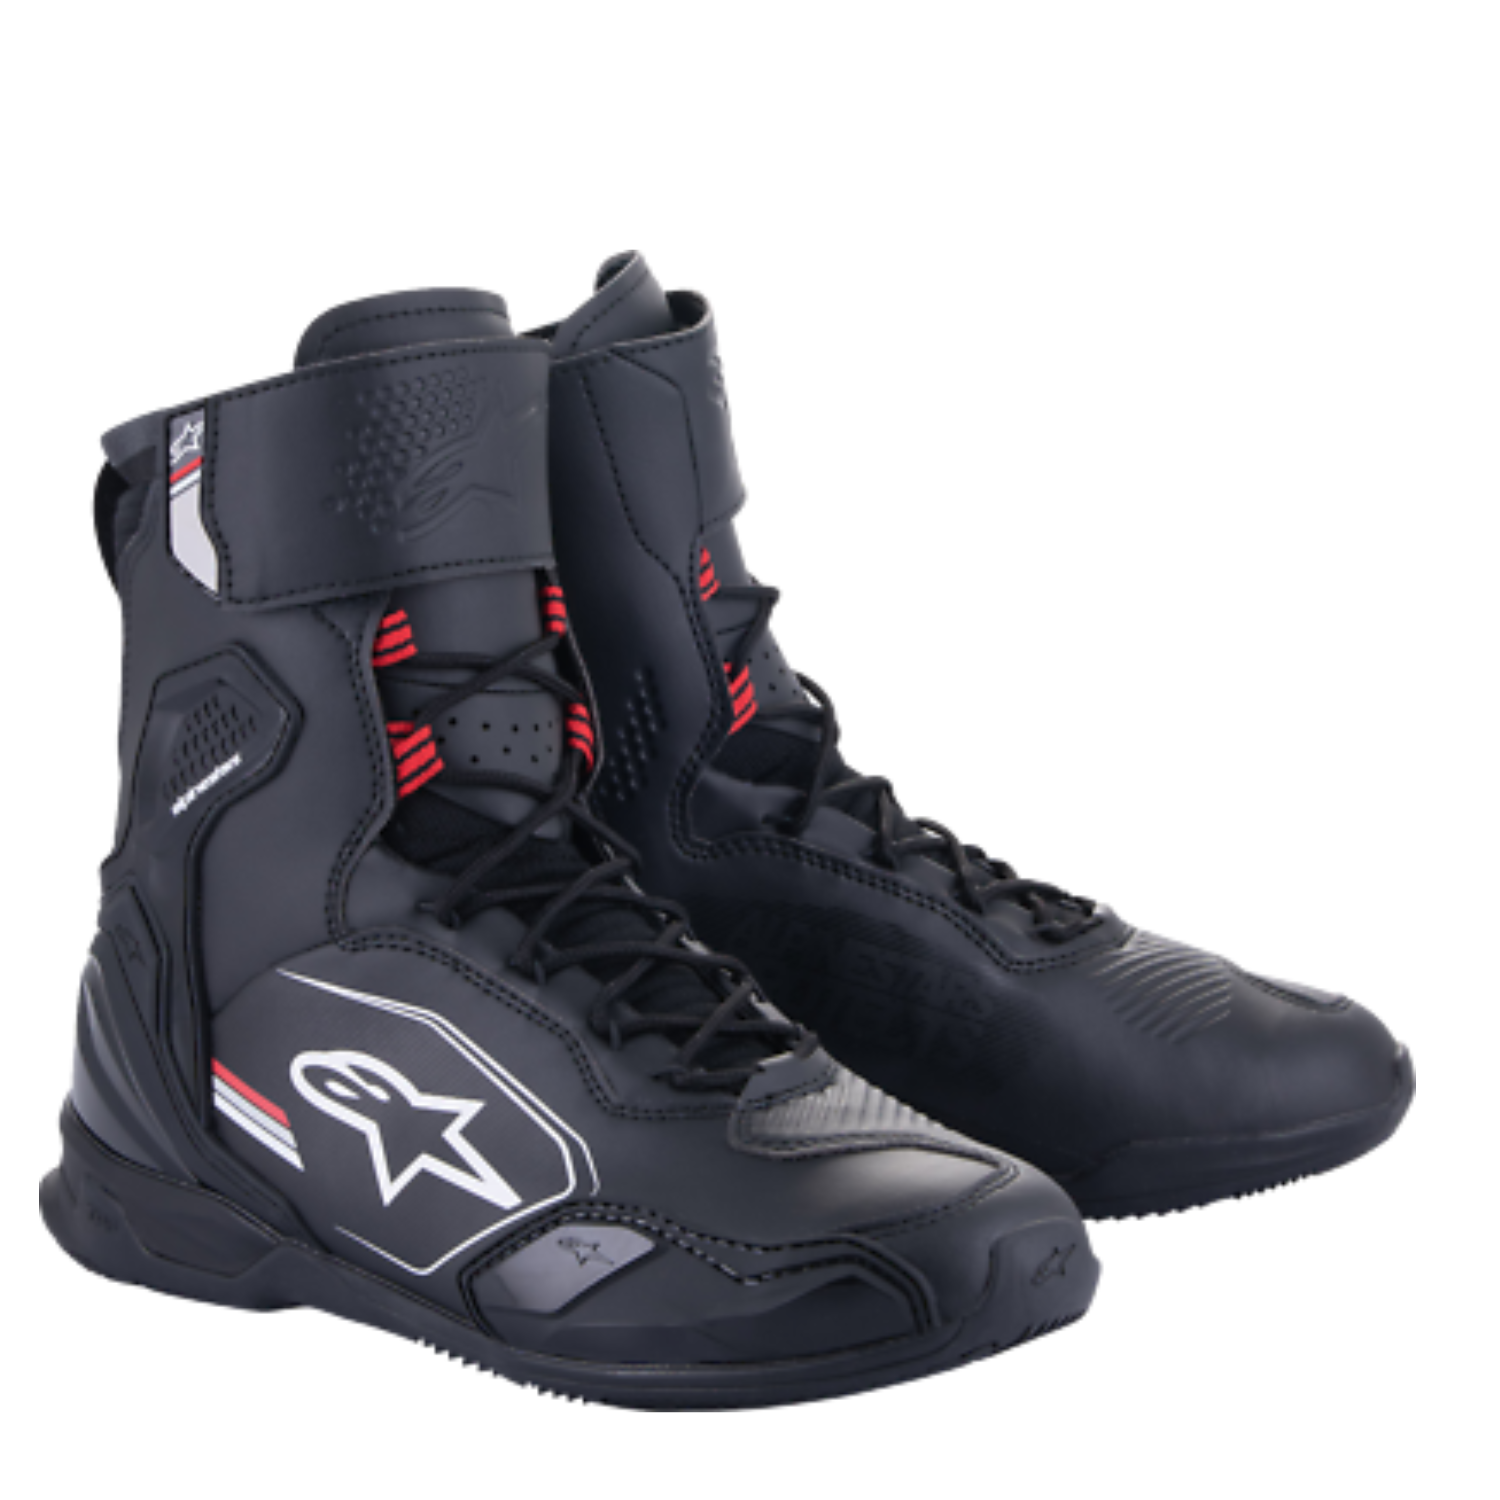 Image of Alpinestars Superfaster Shoes Black Gray Bright Red Size US 135 EN